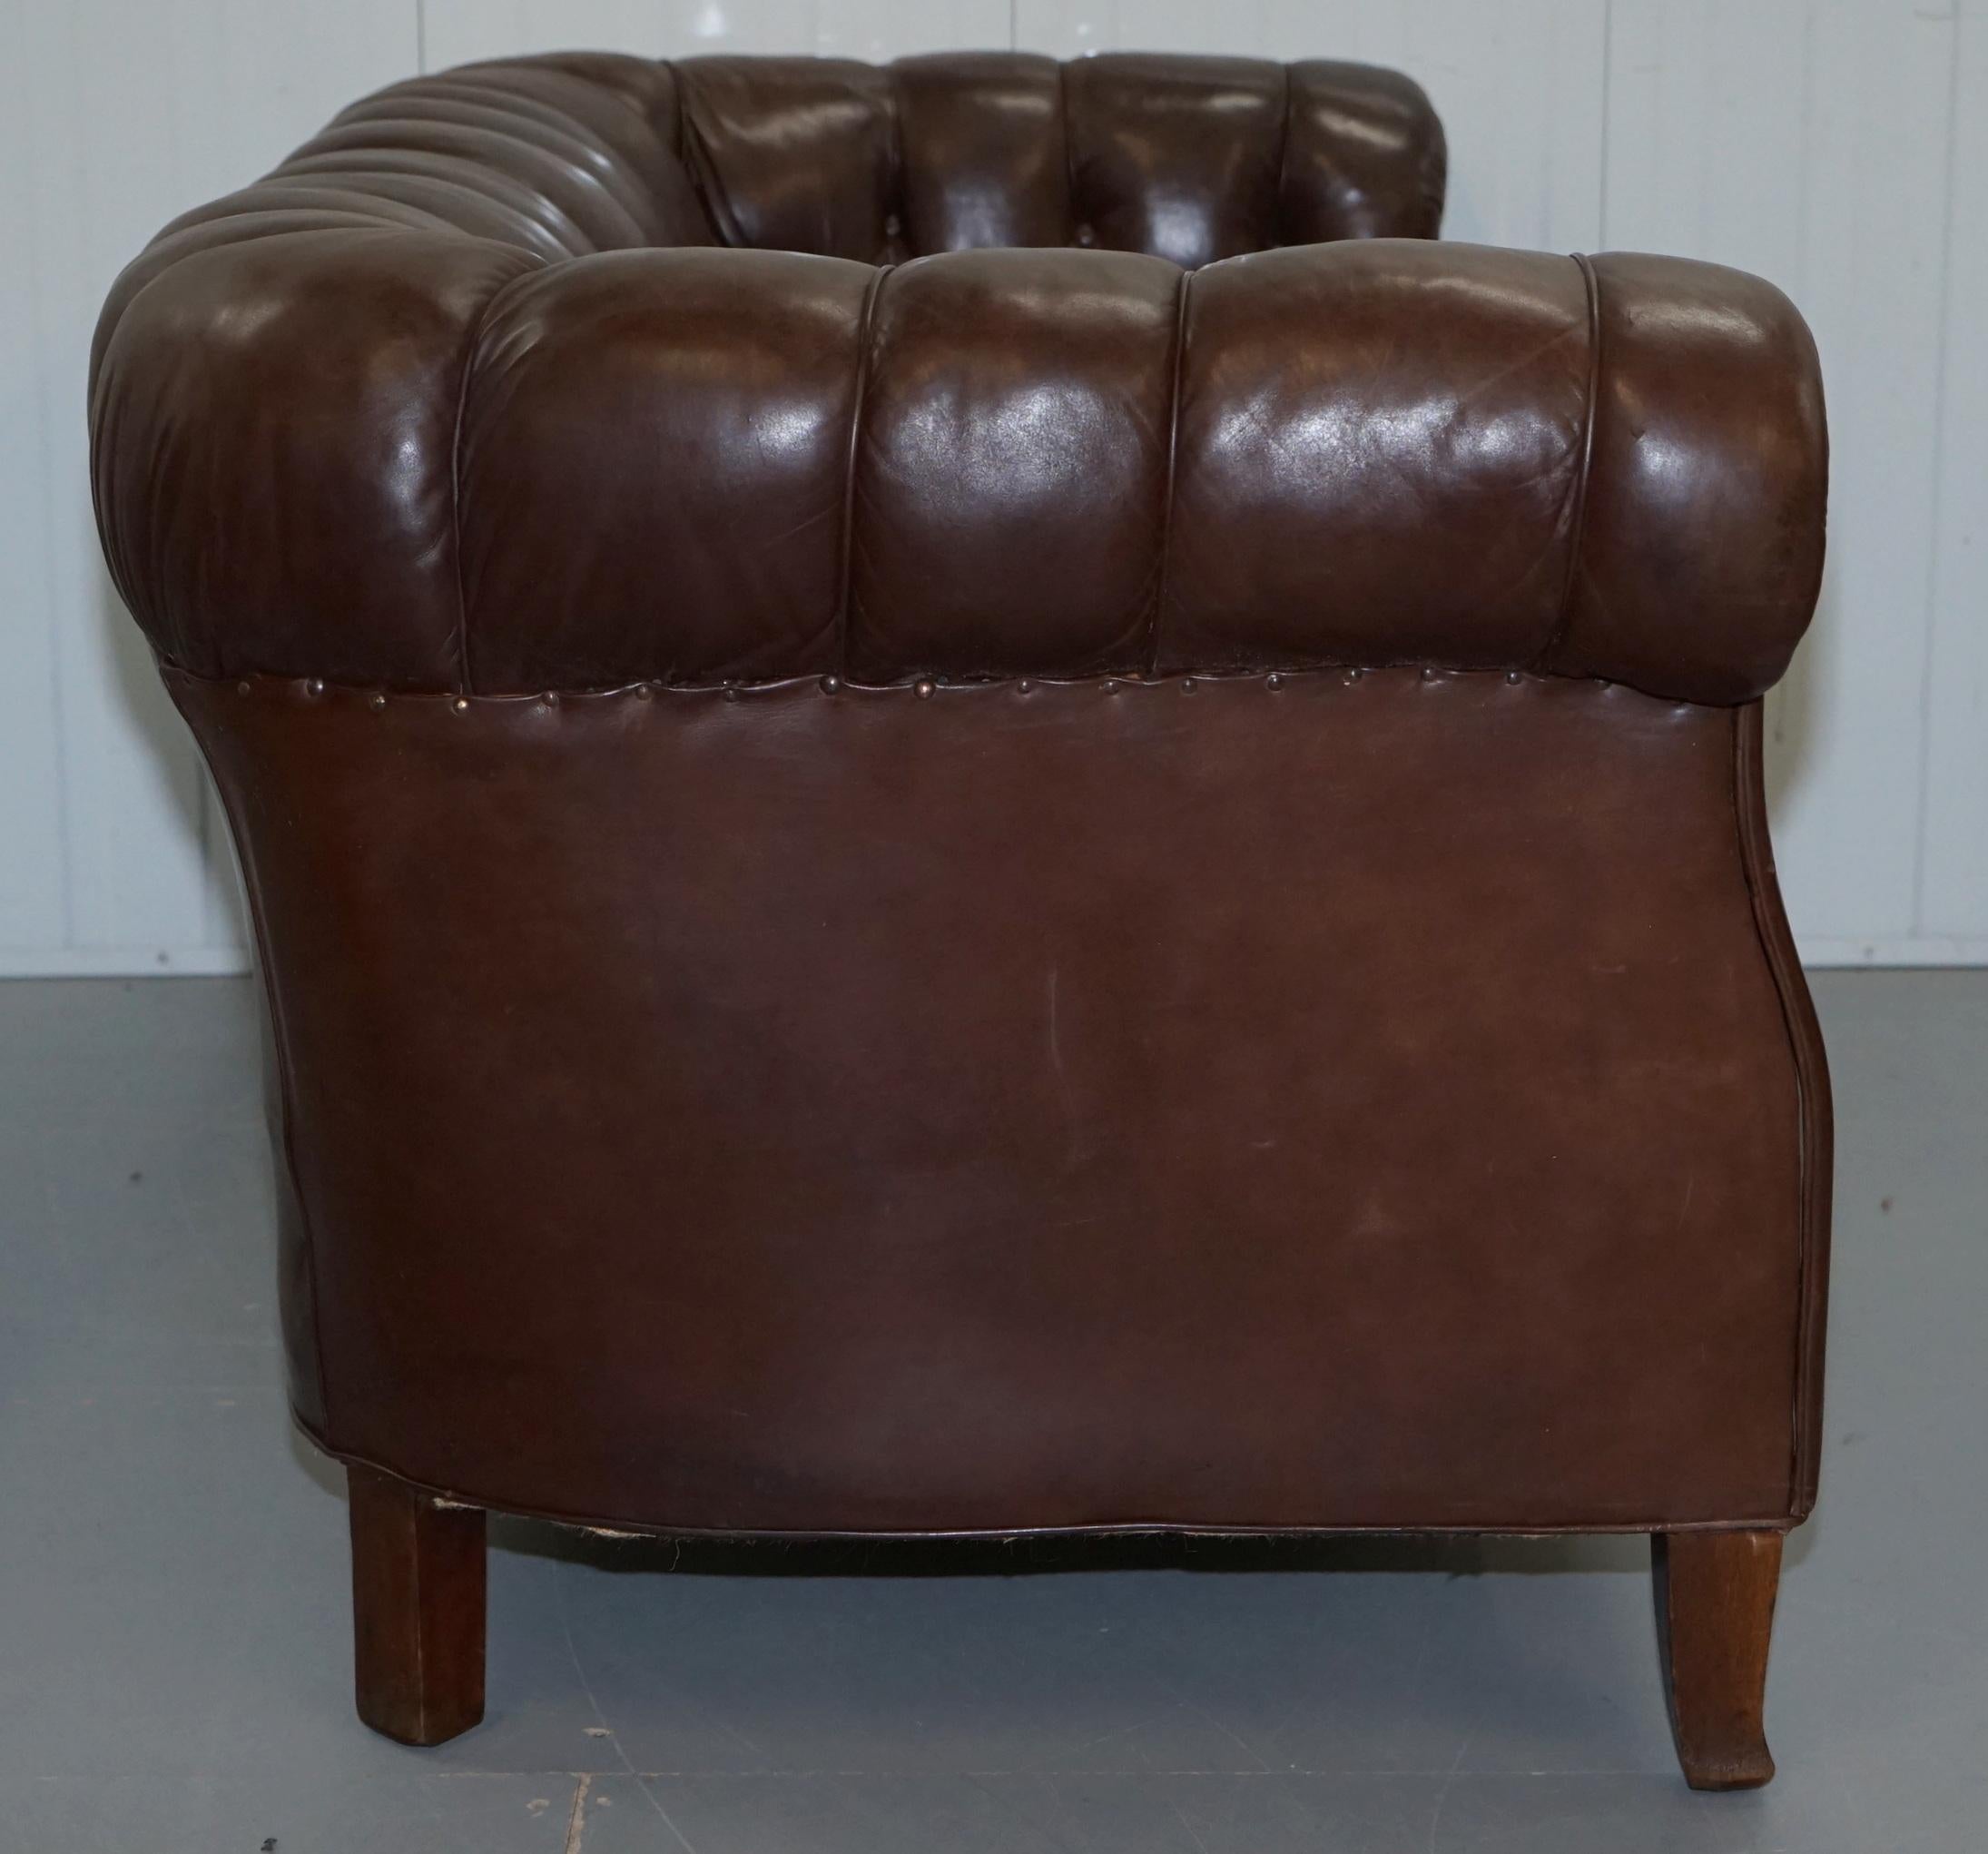 Original Victorian 1890 Swedish Aged Brown Leather Chesterfield Full Sprung Sofa 10